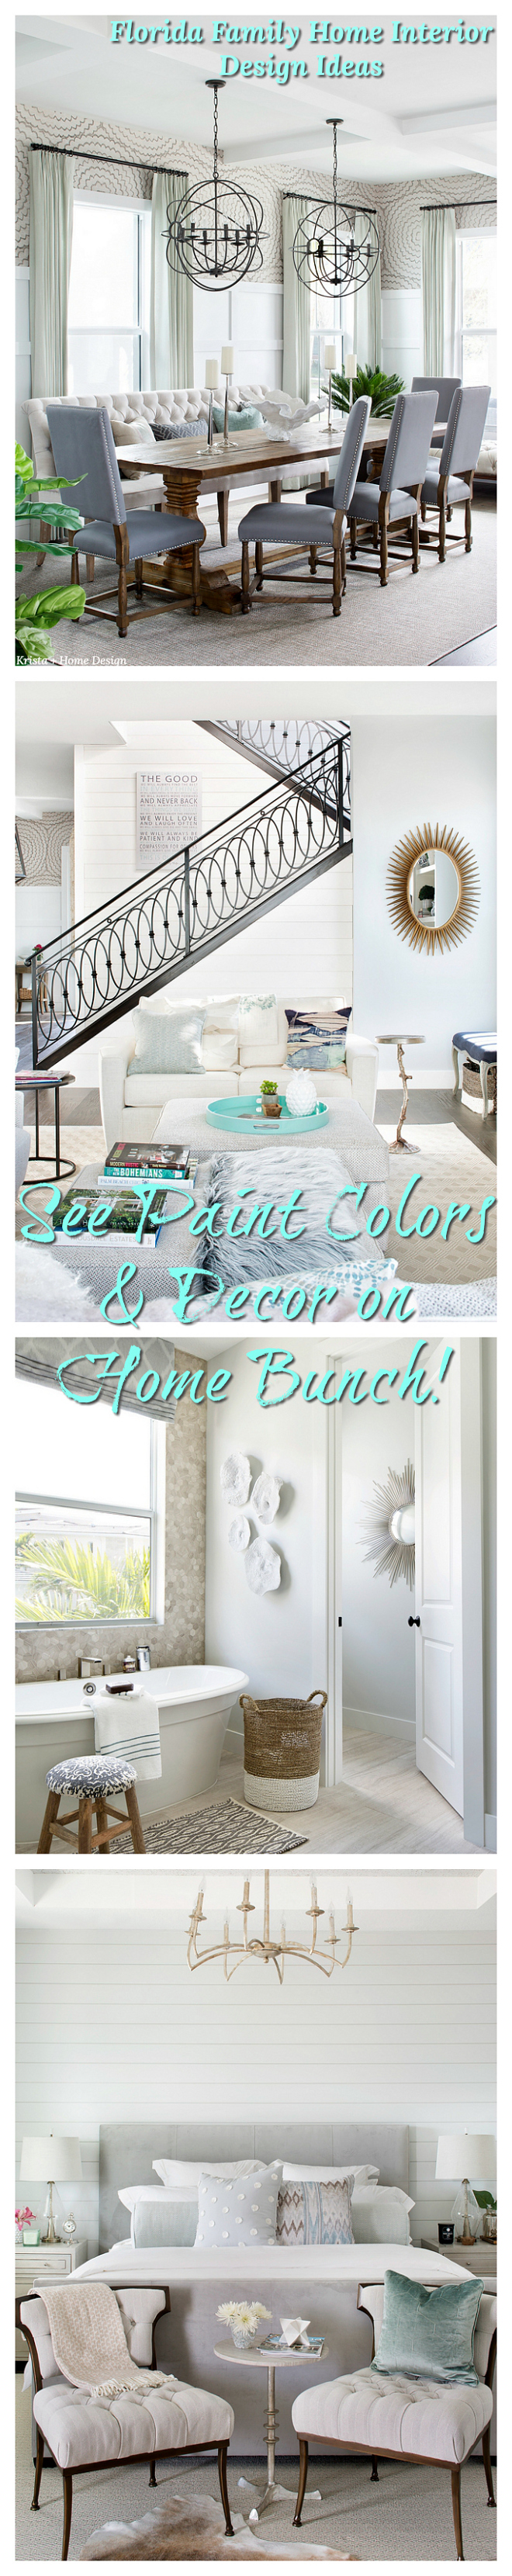 Florida Family Home Interior Design Ideas Paint Colors and Decor on Home Bunch Florida Family Home Interior Design Ideas #Florida #FamilyHome #InteriorDesignIdeas